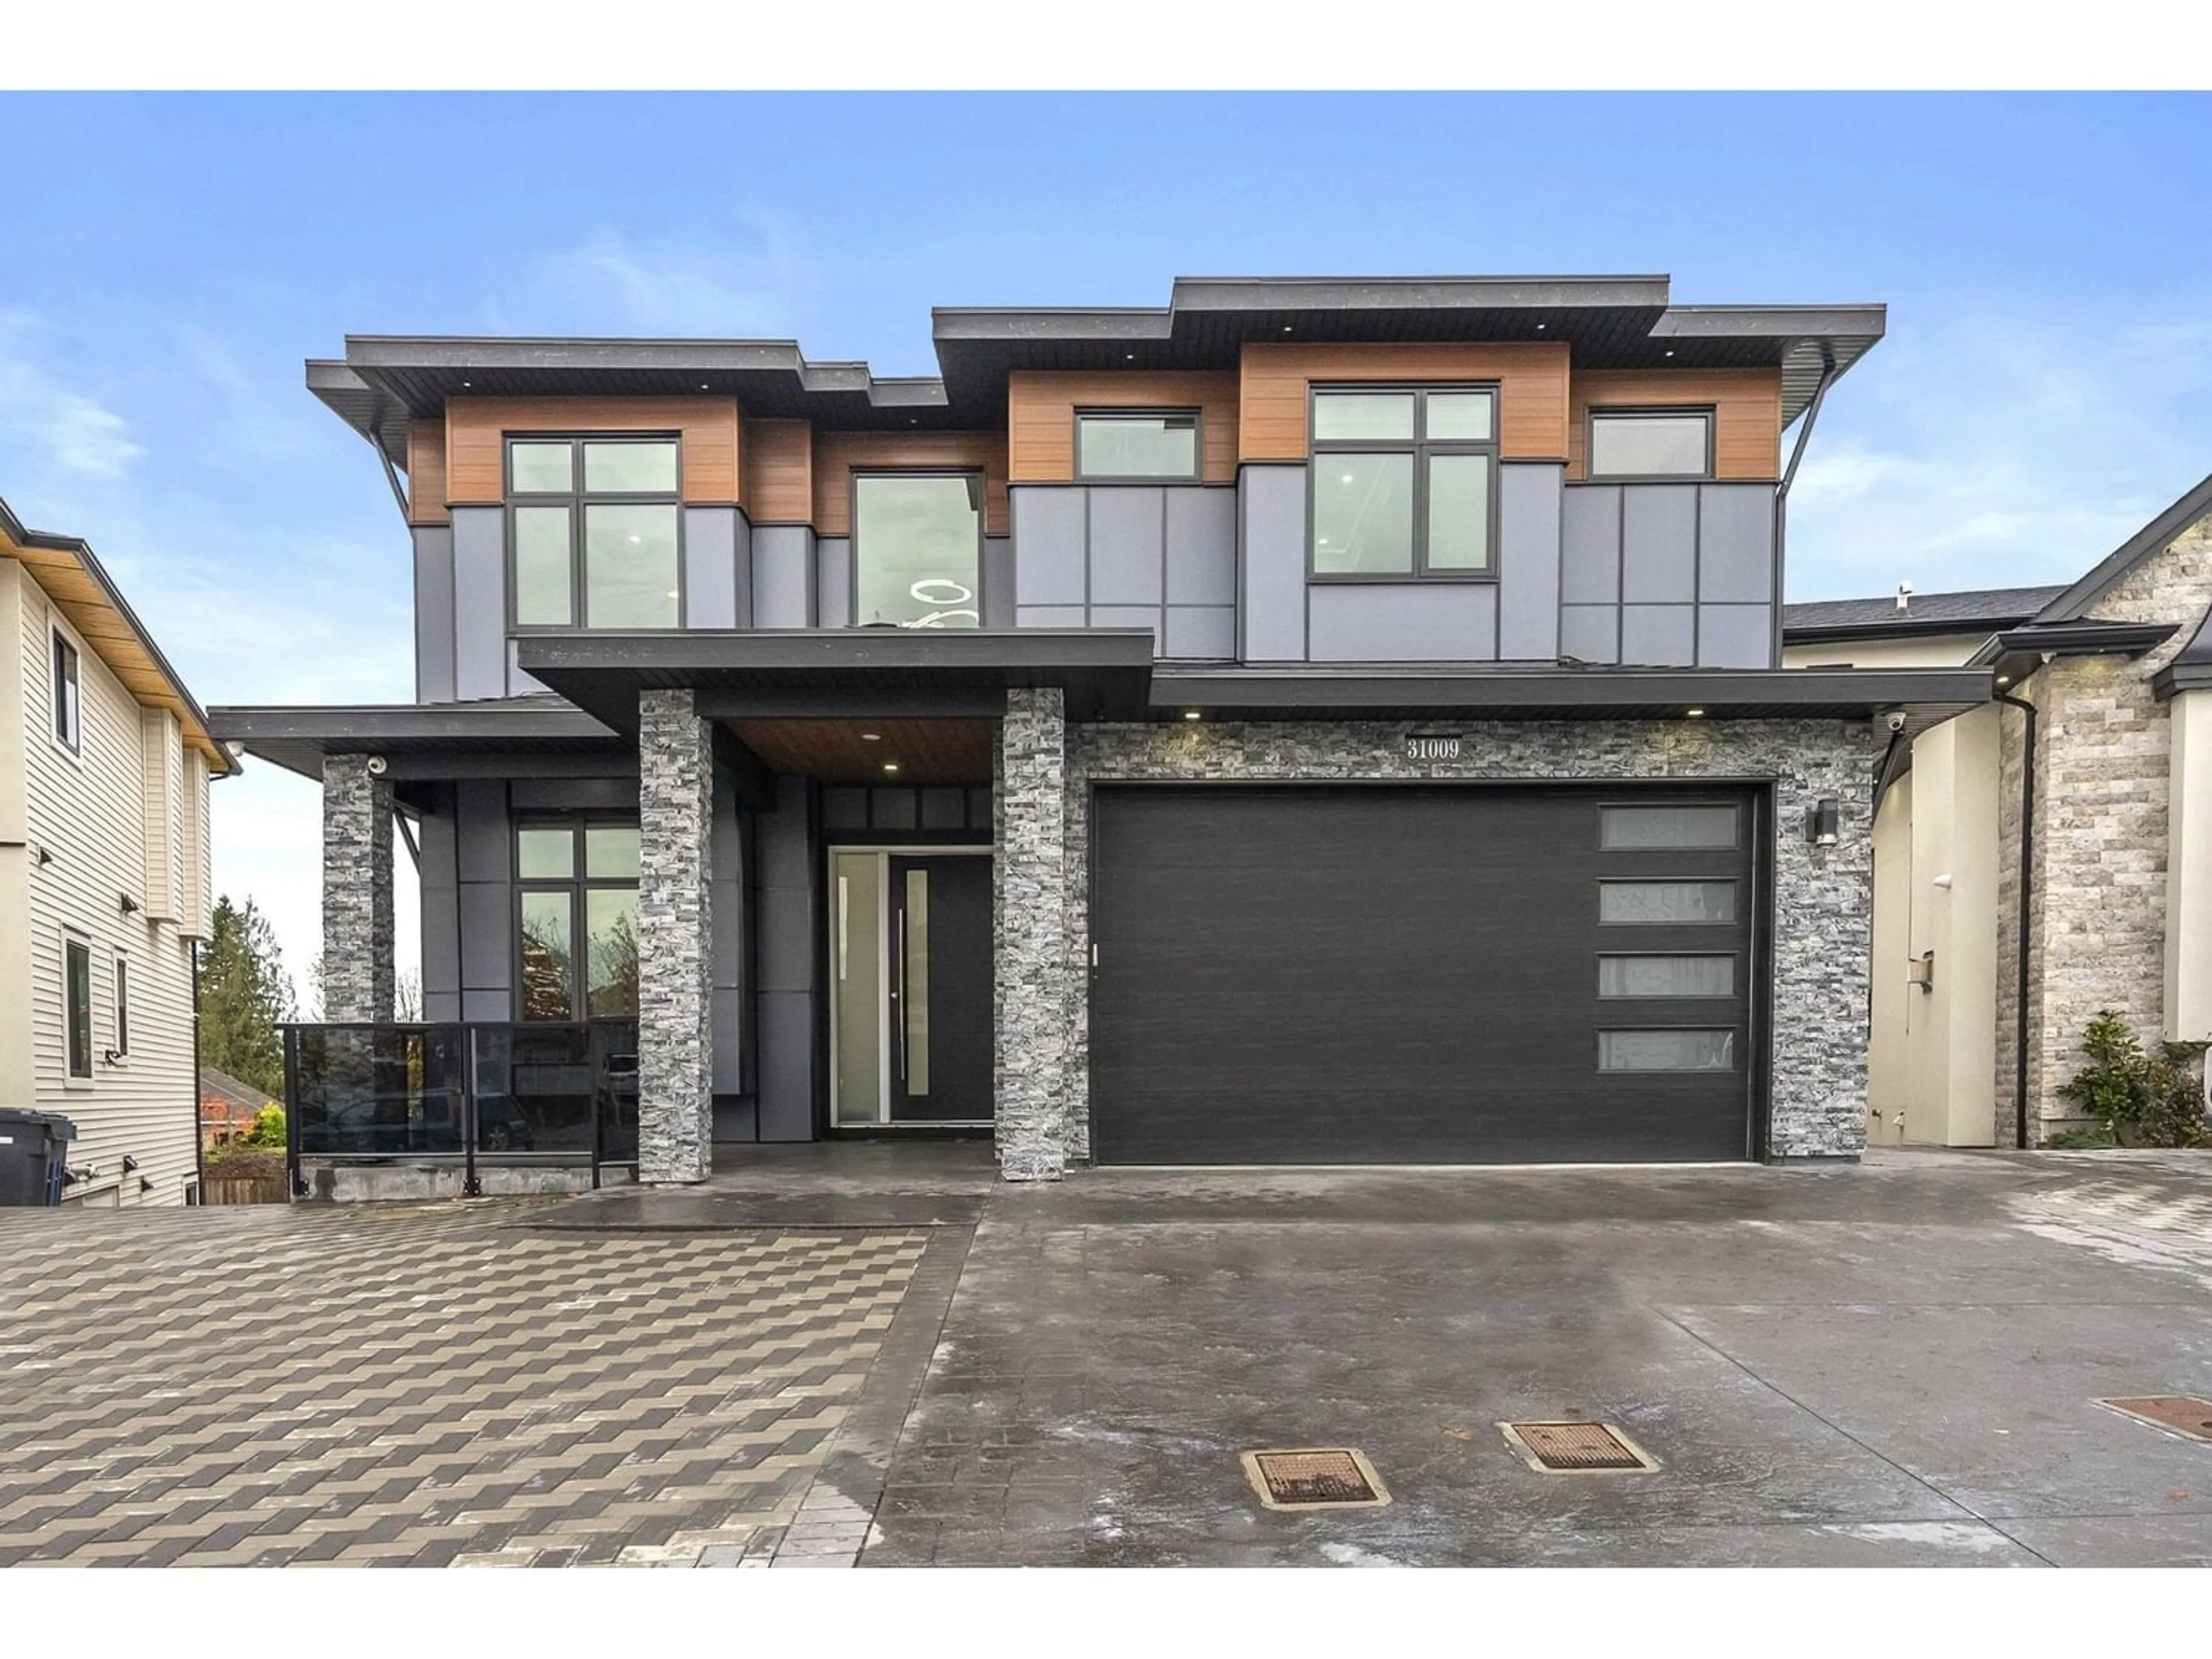 Home with brick exterior material for 31009 N DEERTRAIL DRIVE, Abbotsford British Columbia V2T5J5